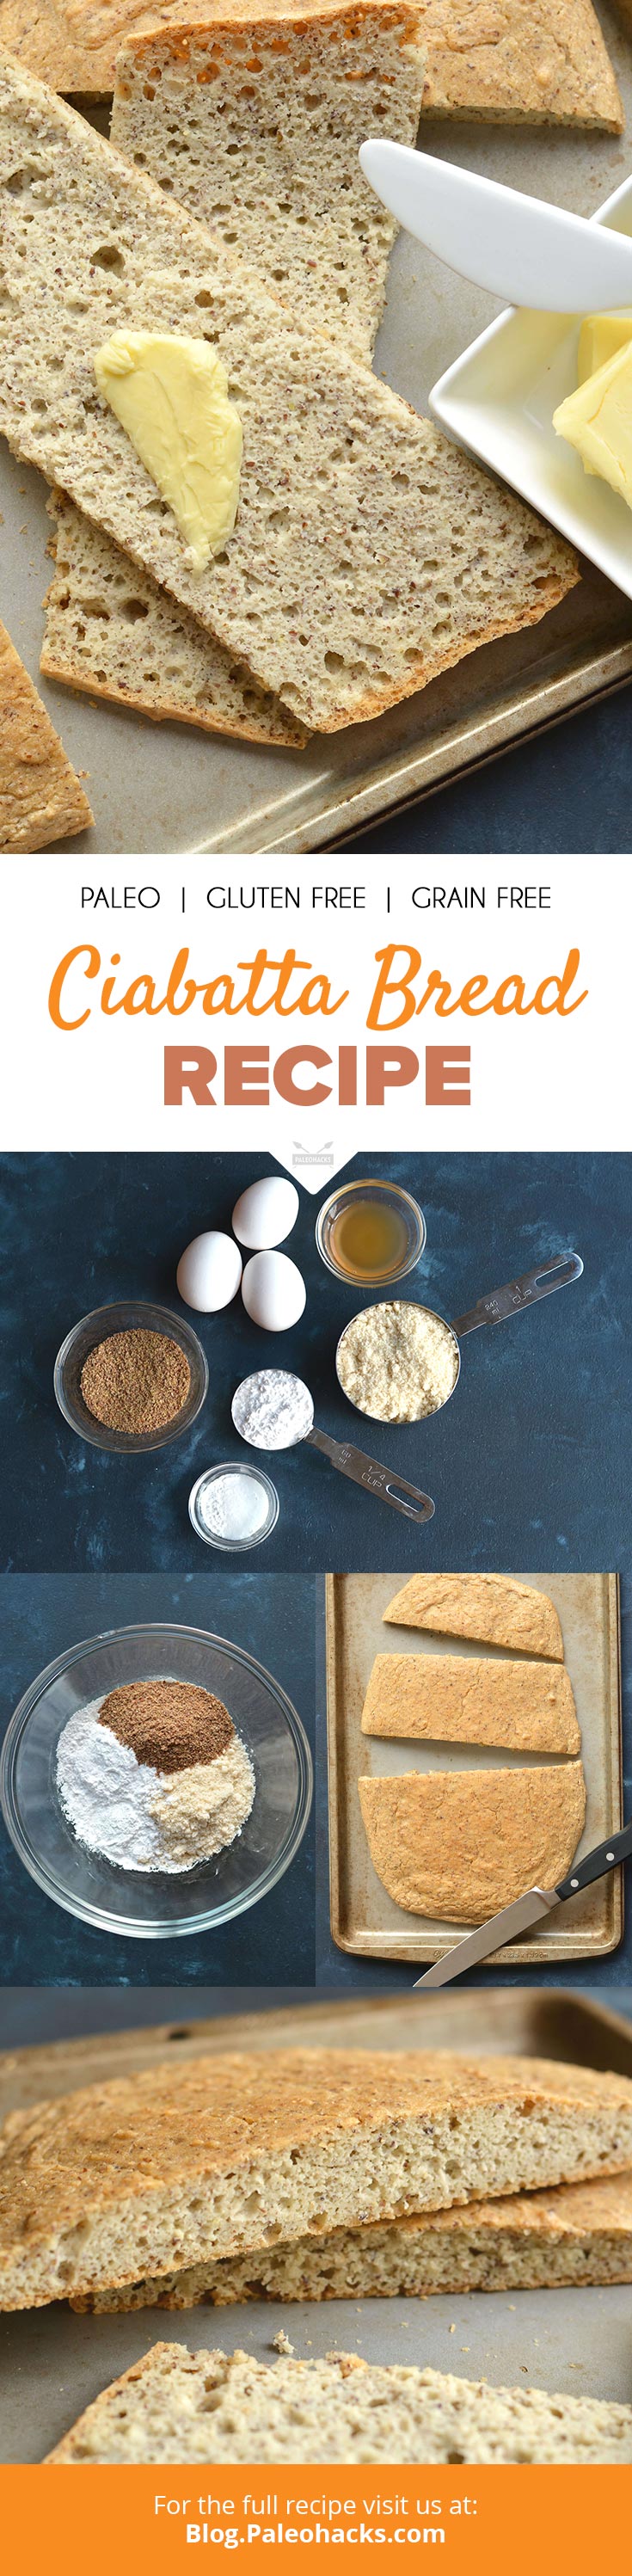 Thick, light and airy, this Paleo Ciabatta is made with a hearty blend of grain-free flours for a healthy snack full of fiber and protein.